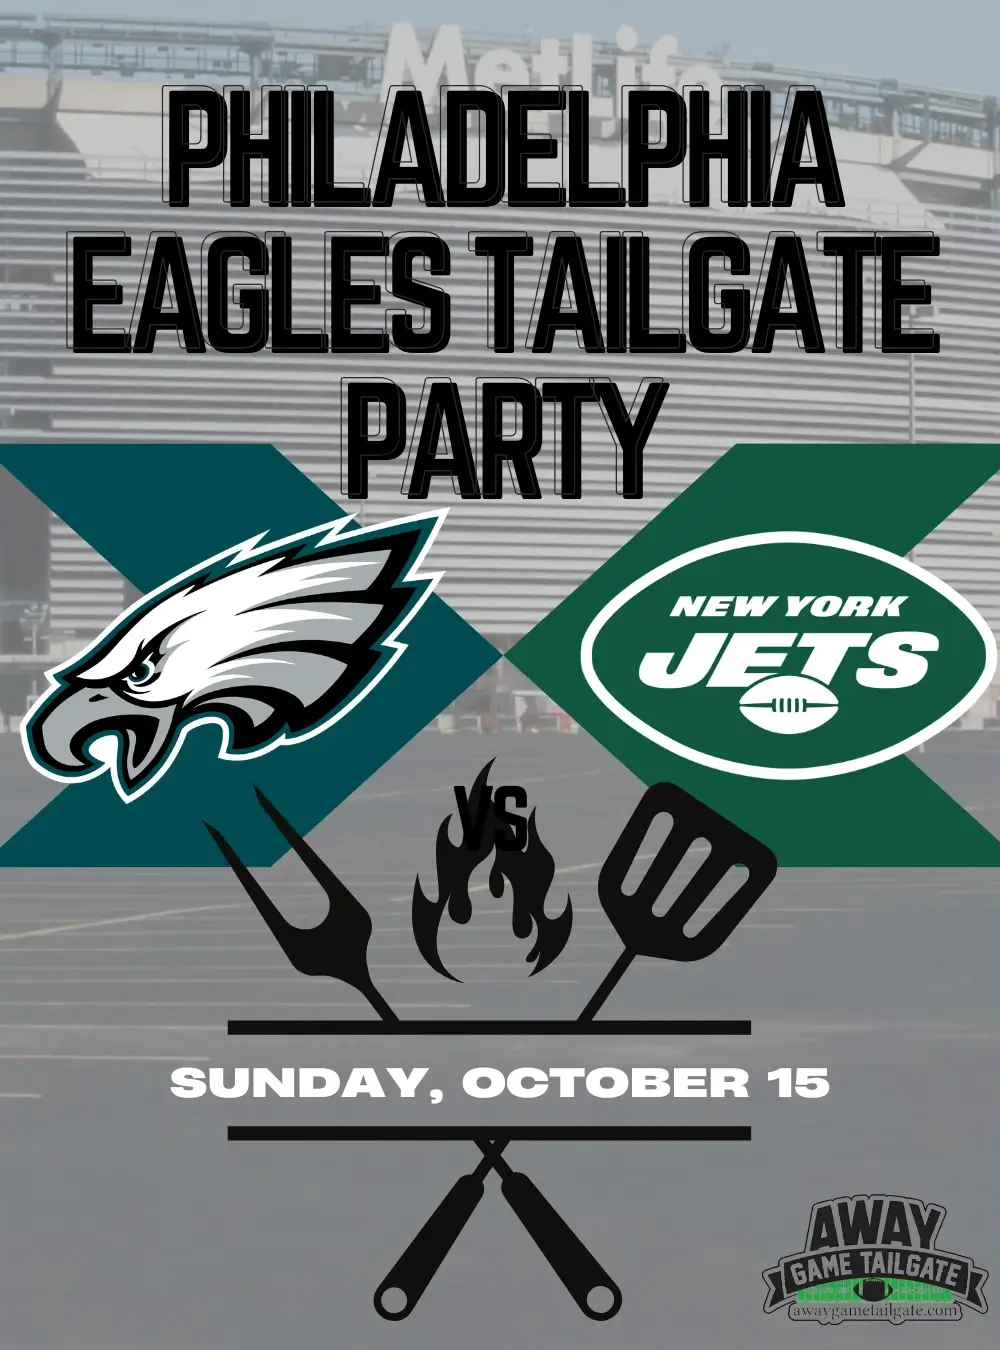 Tailgate With Us - Away Game Tailgate